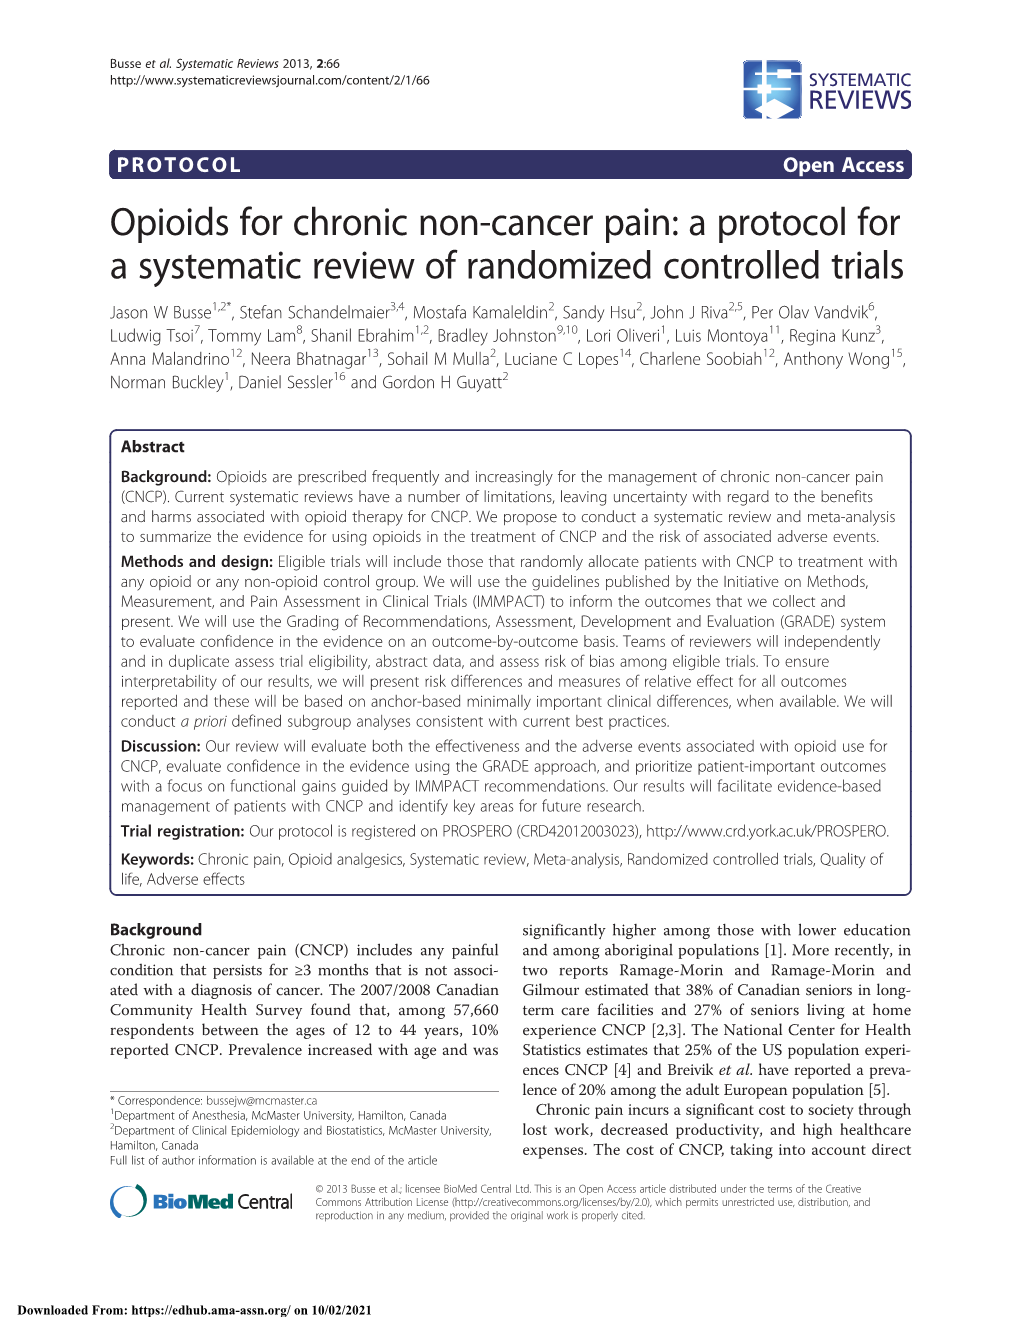 Opioids for Chronic Noncancer Paina Systematic